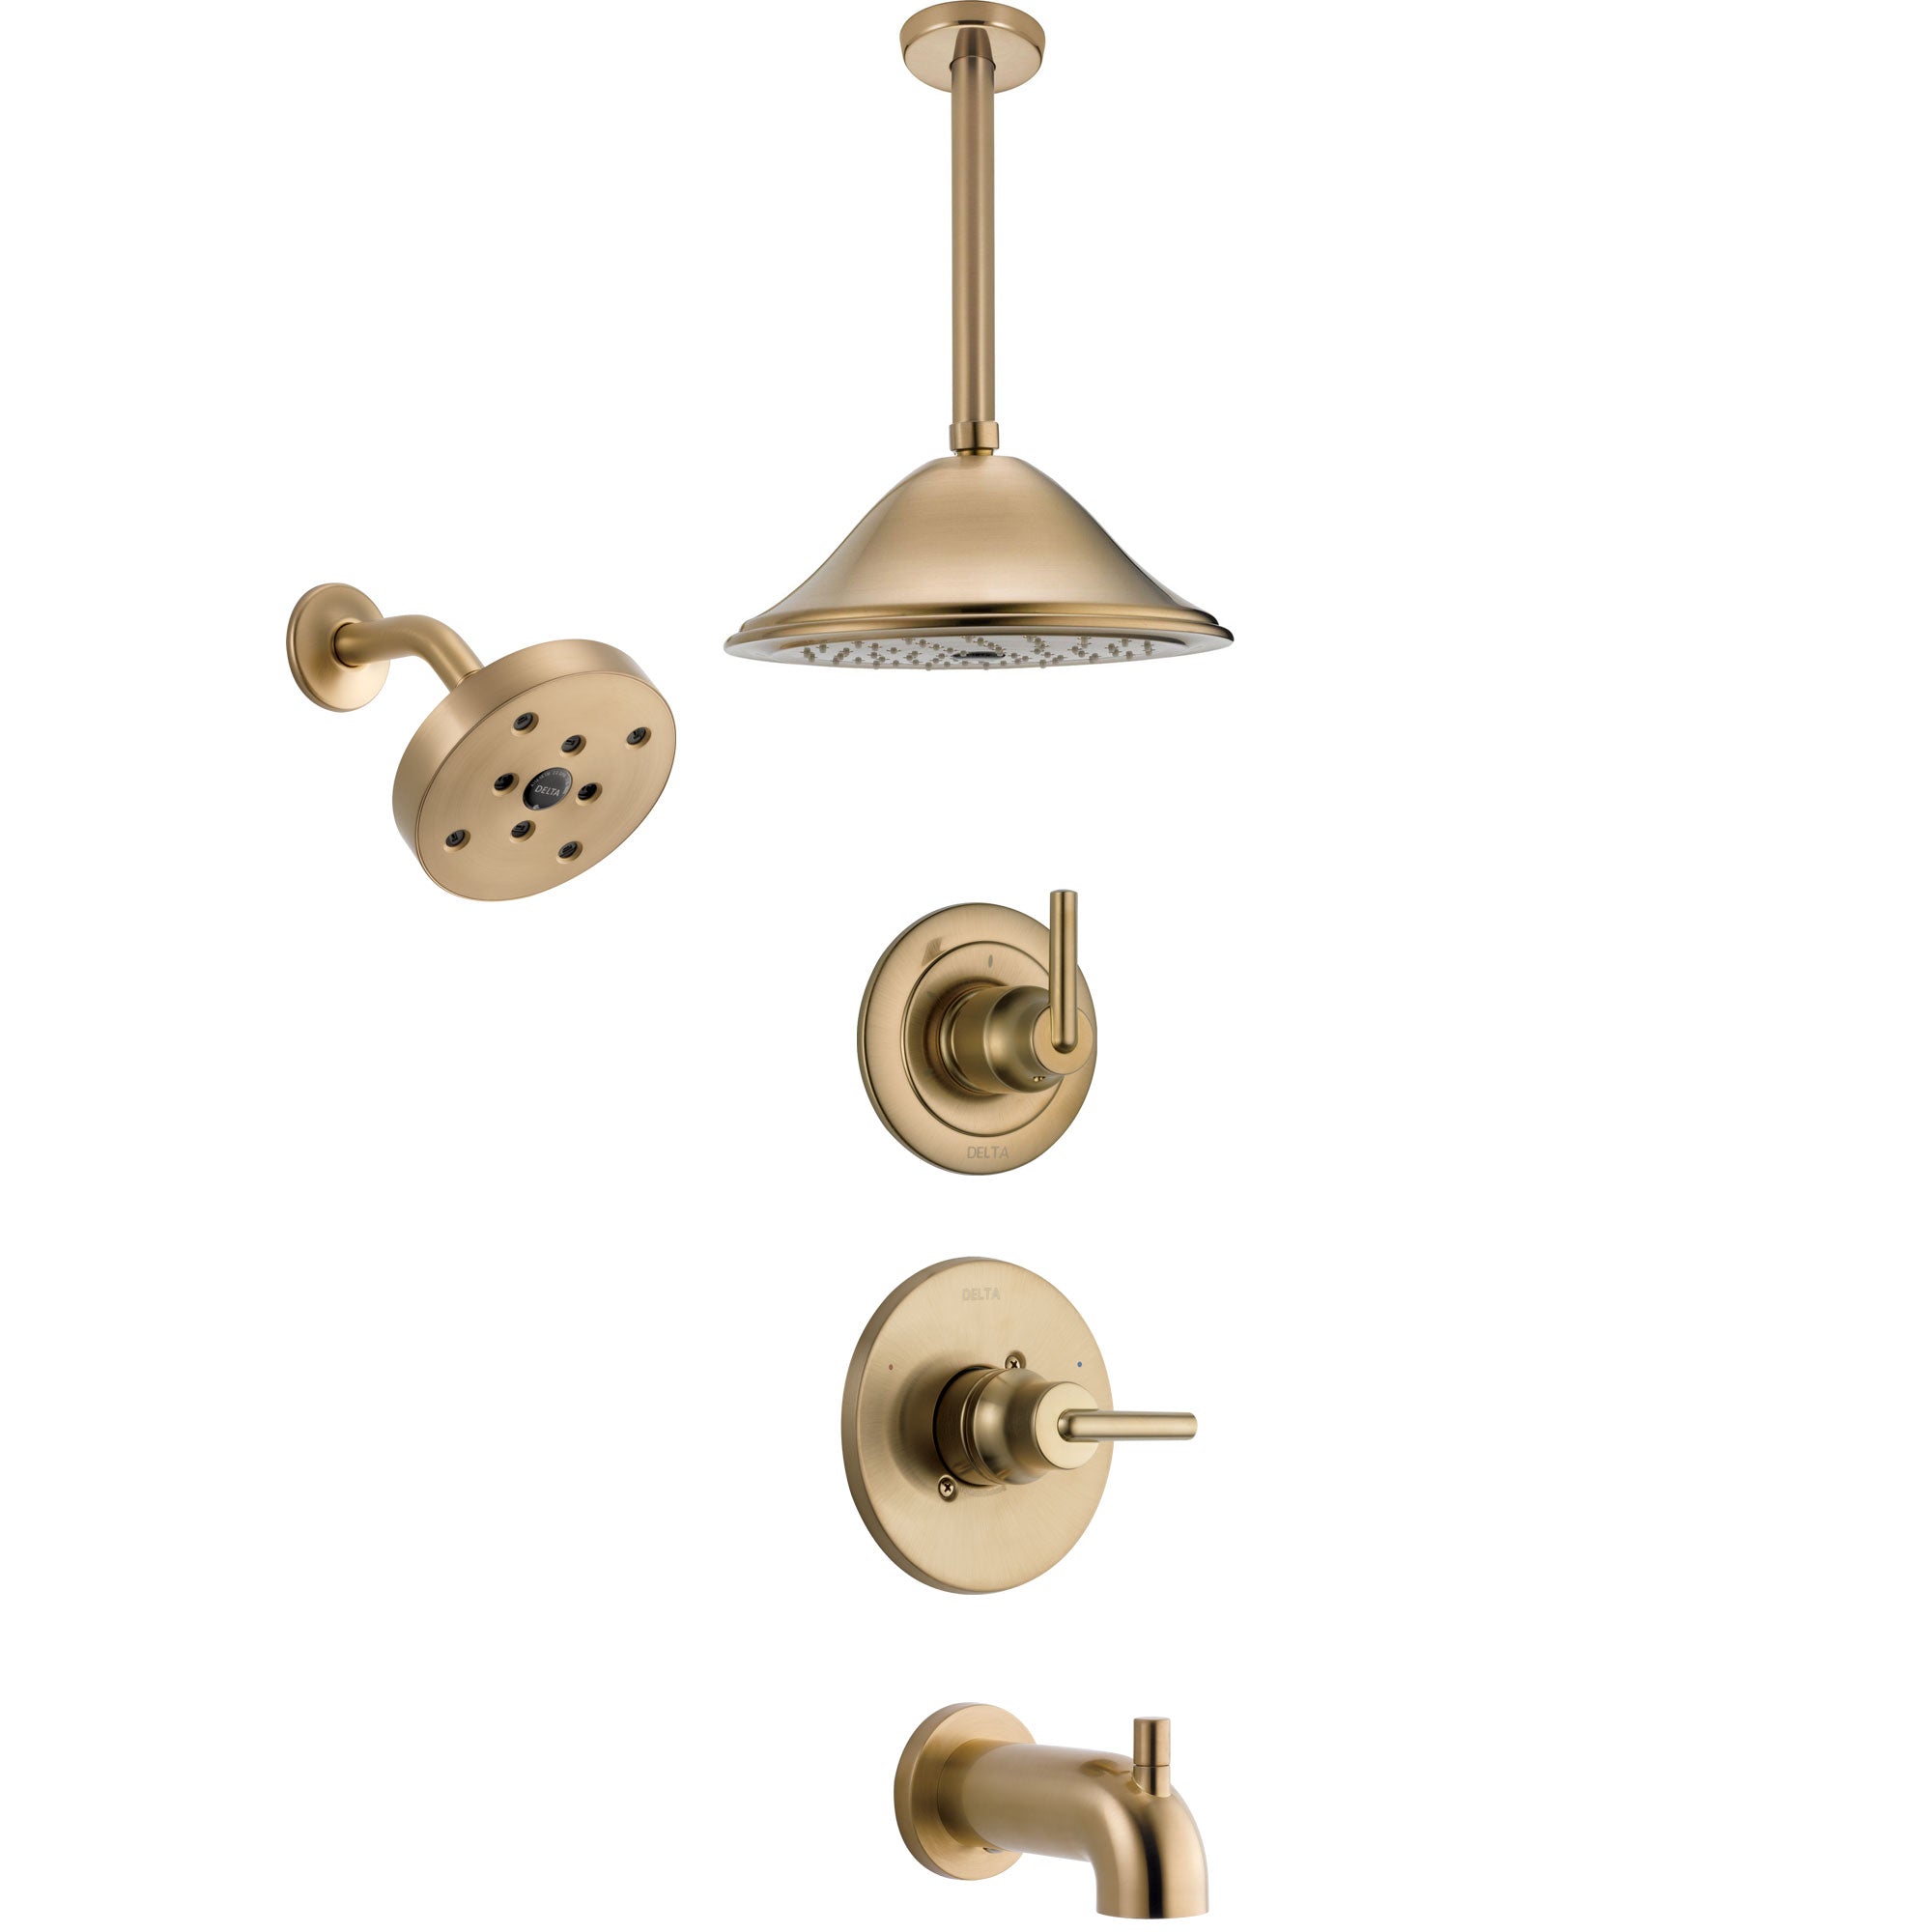 Delta Trinsic Champagne Bronze Tub and Shower System with Control Handle, 3-Setting Diverter, Showerhead, and Ceiling Mount Showerhead SS14459CZ4